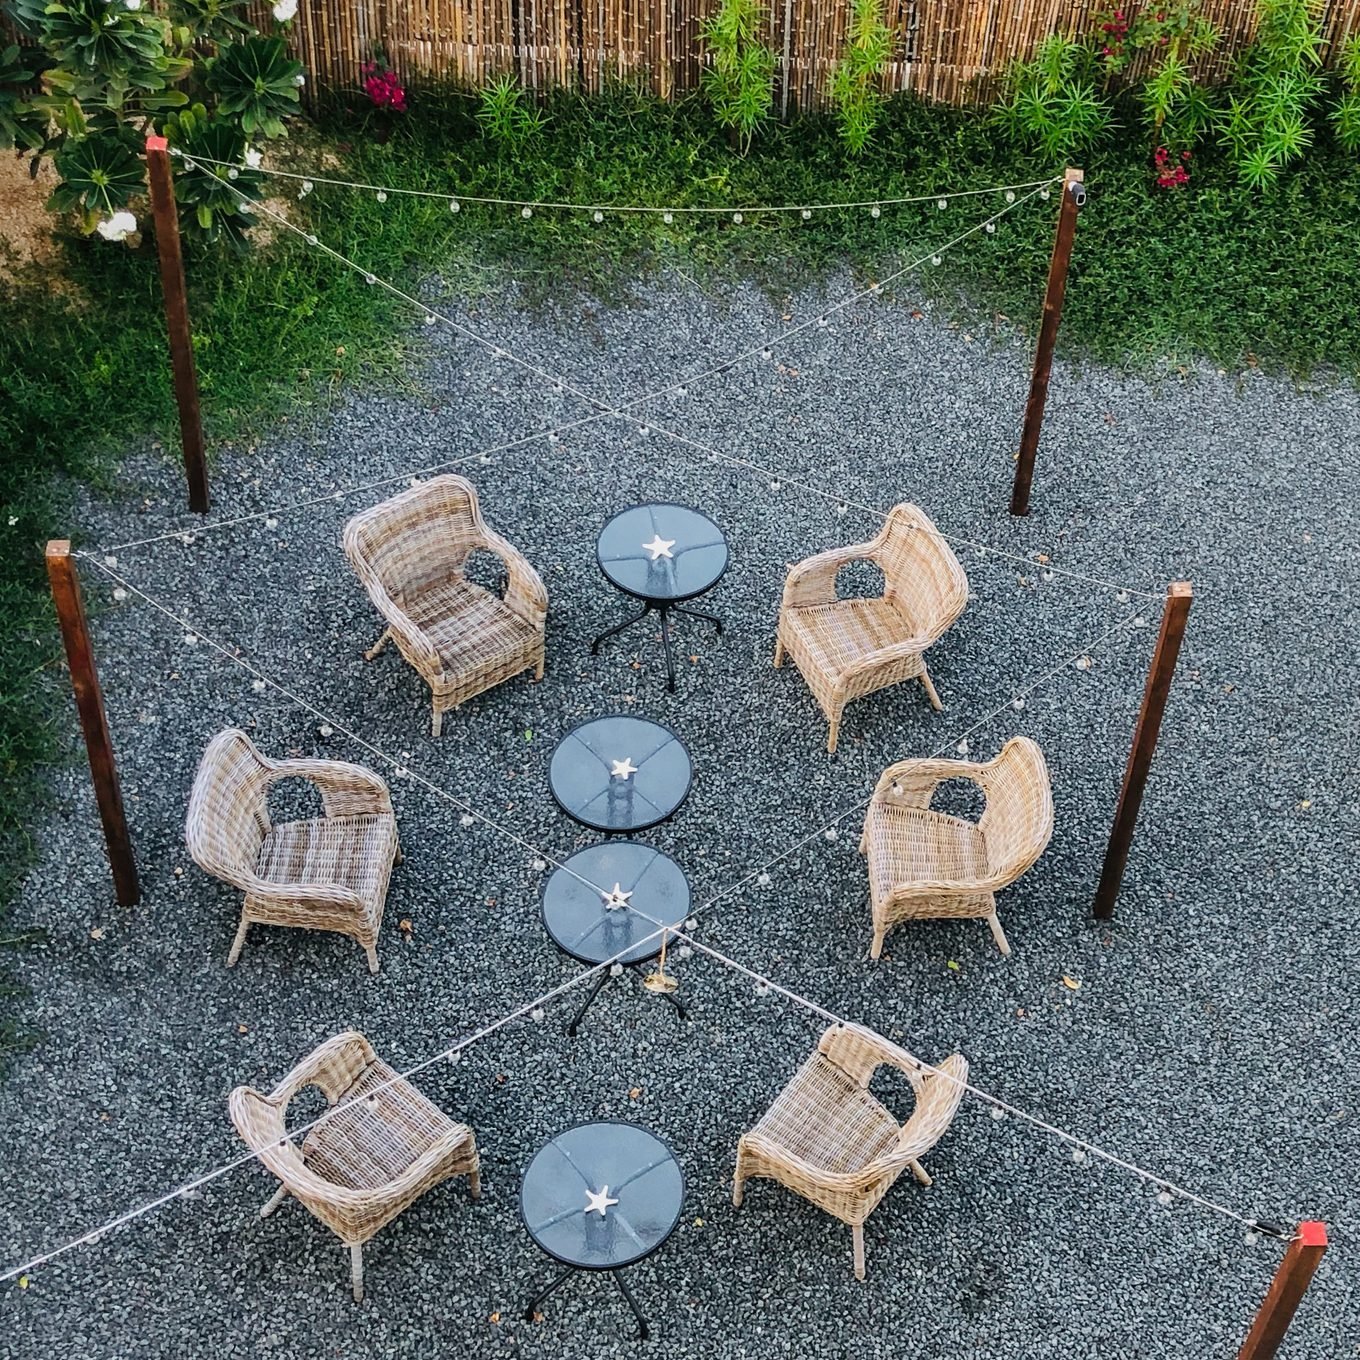 14 Outdoor Flooring Options - Ultimate Guide